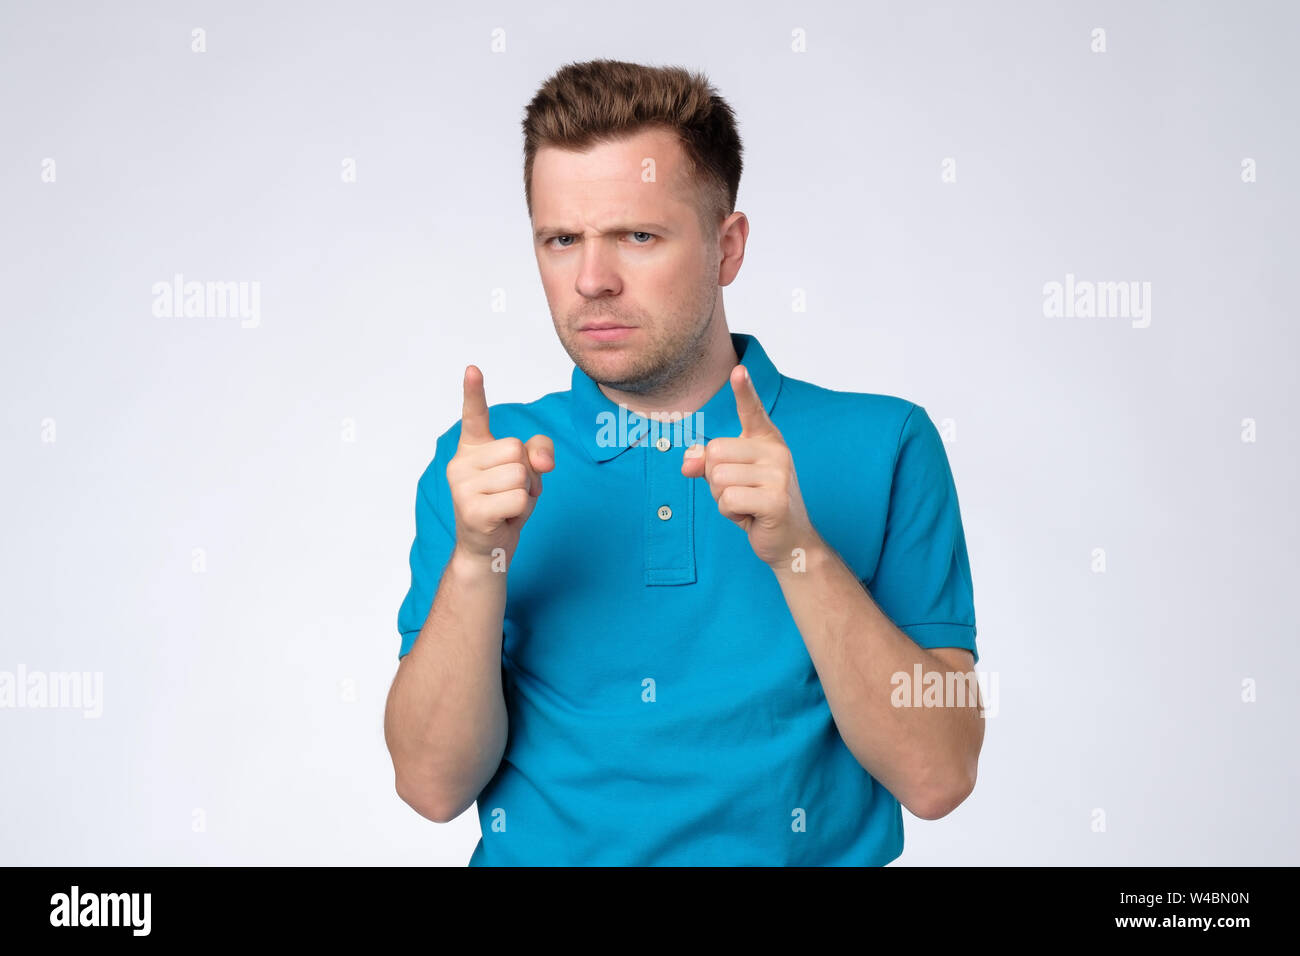 Youn caucasian man frowning accusing his coworker. Giving advice concept Stock Photo